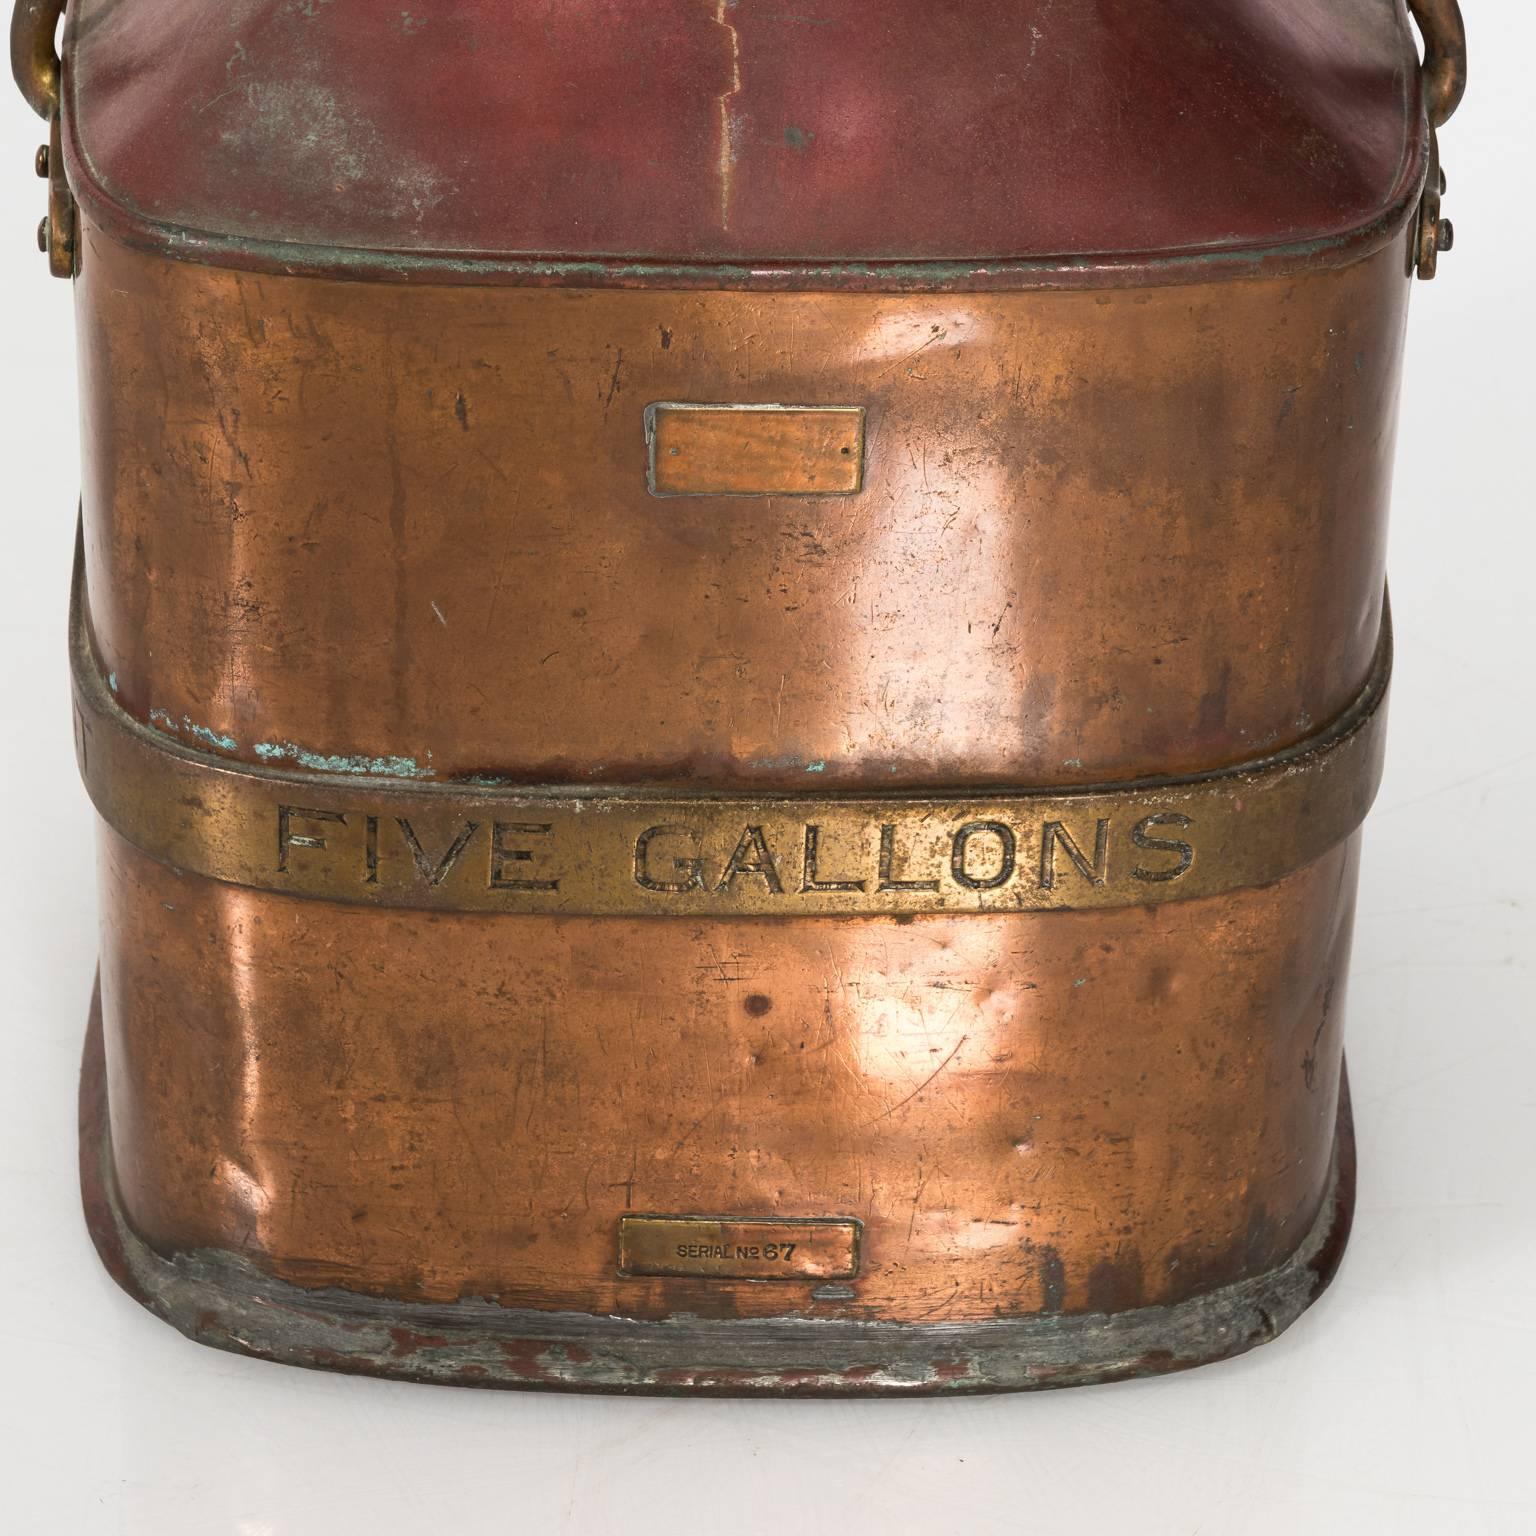 19th Century English Five Gallon Dairy Container